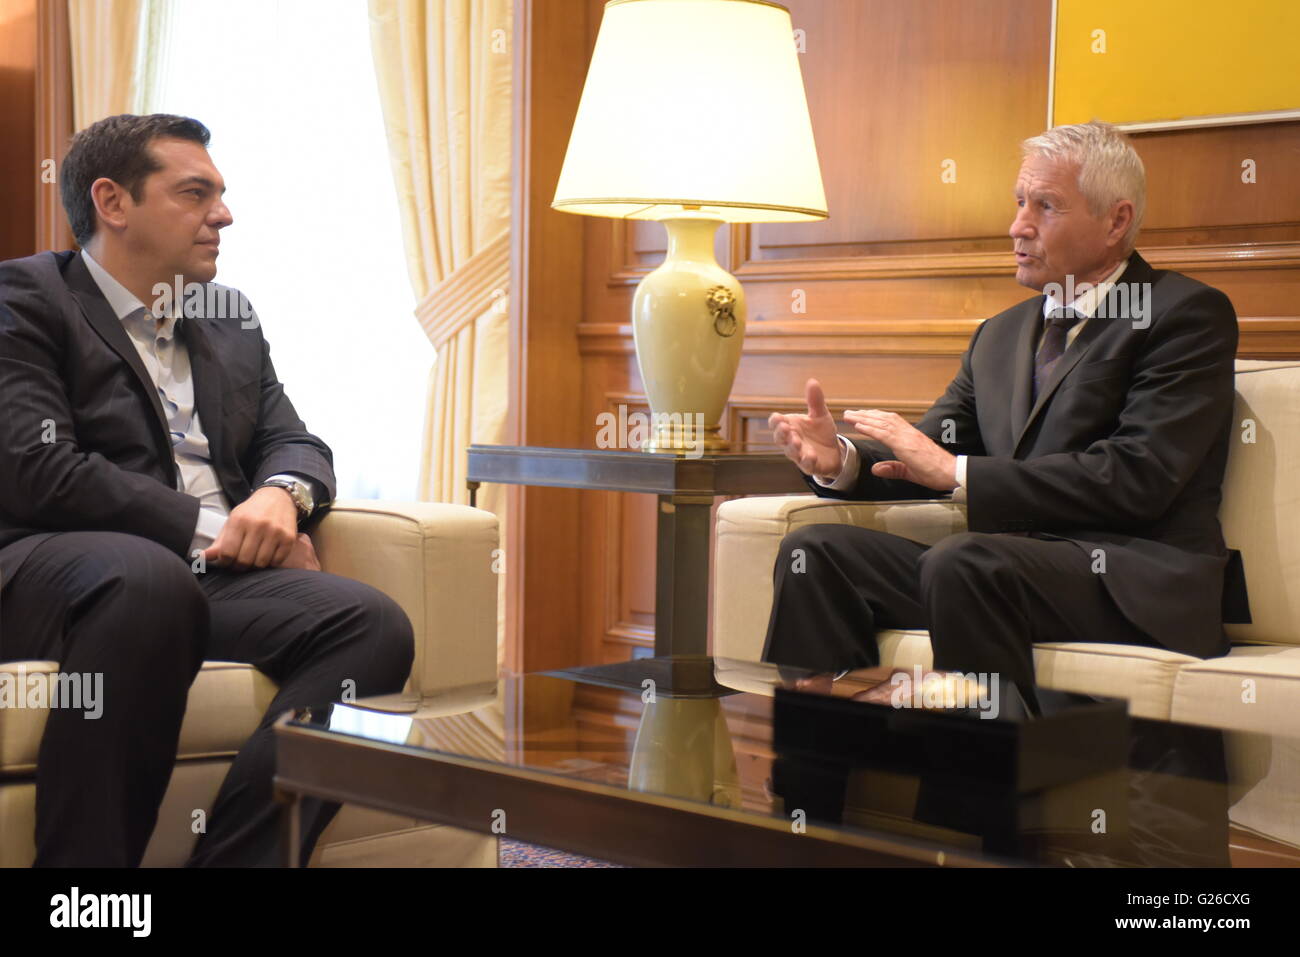 Conversation between Greek Prime Minister Mr. Alexis Tsipras (left) and of General Secretary of Council of Europe, Mr. Thorbjorn Jagland (right). (Photo by Dimitrios Karvountzis/Pacific Press) Stock Photo